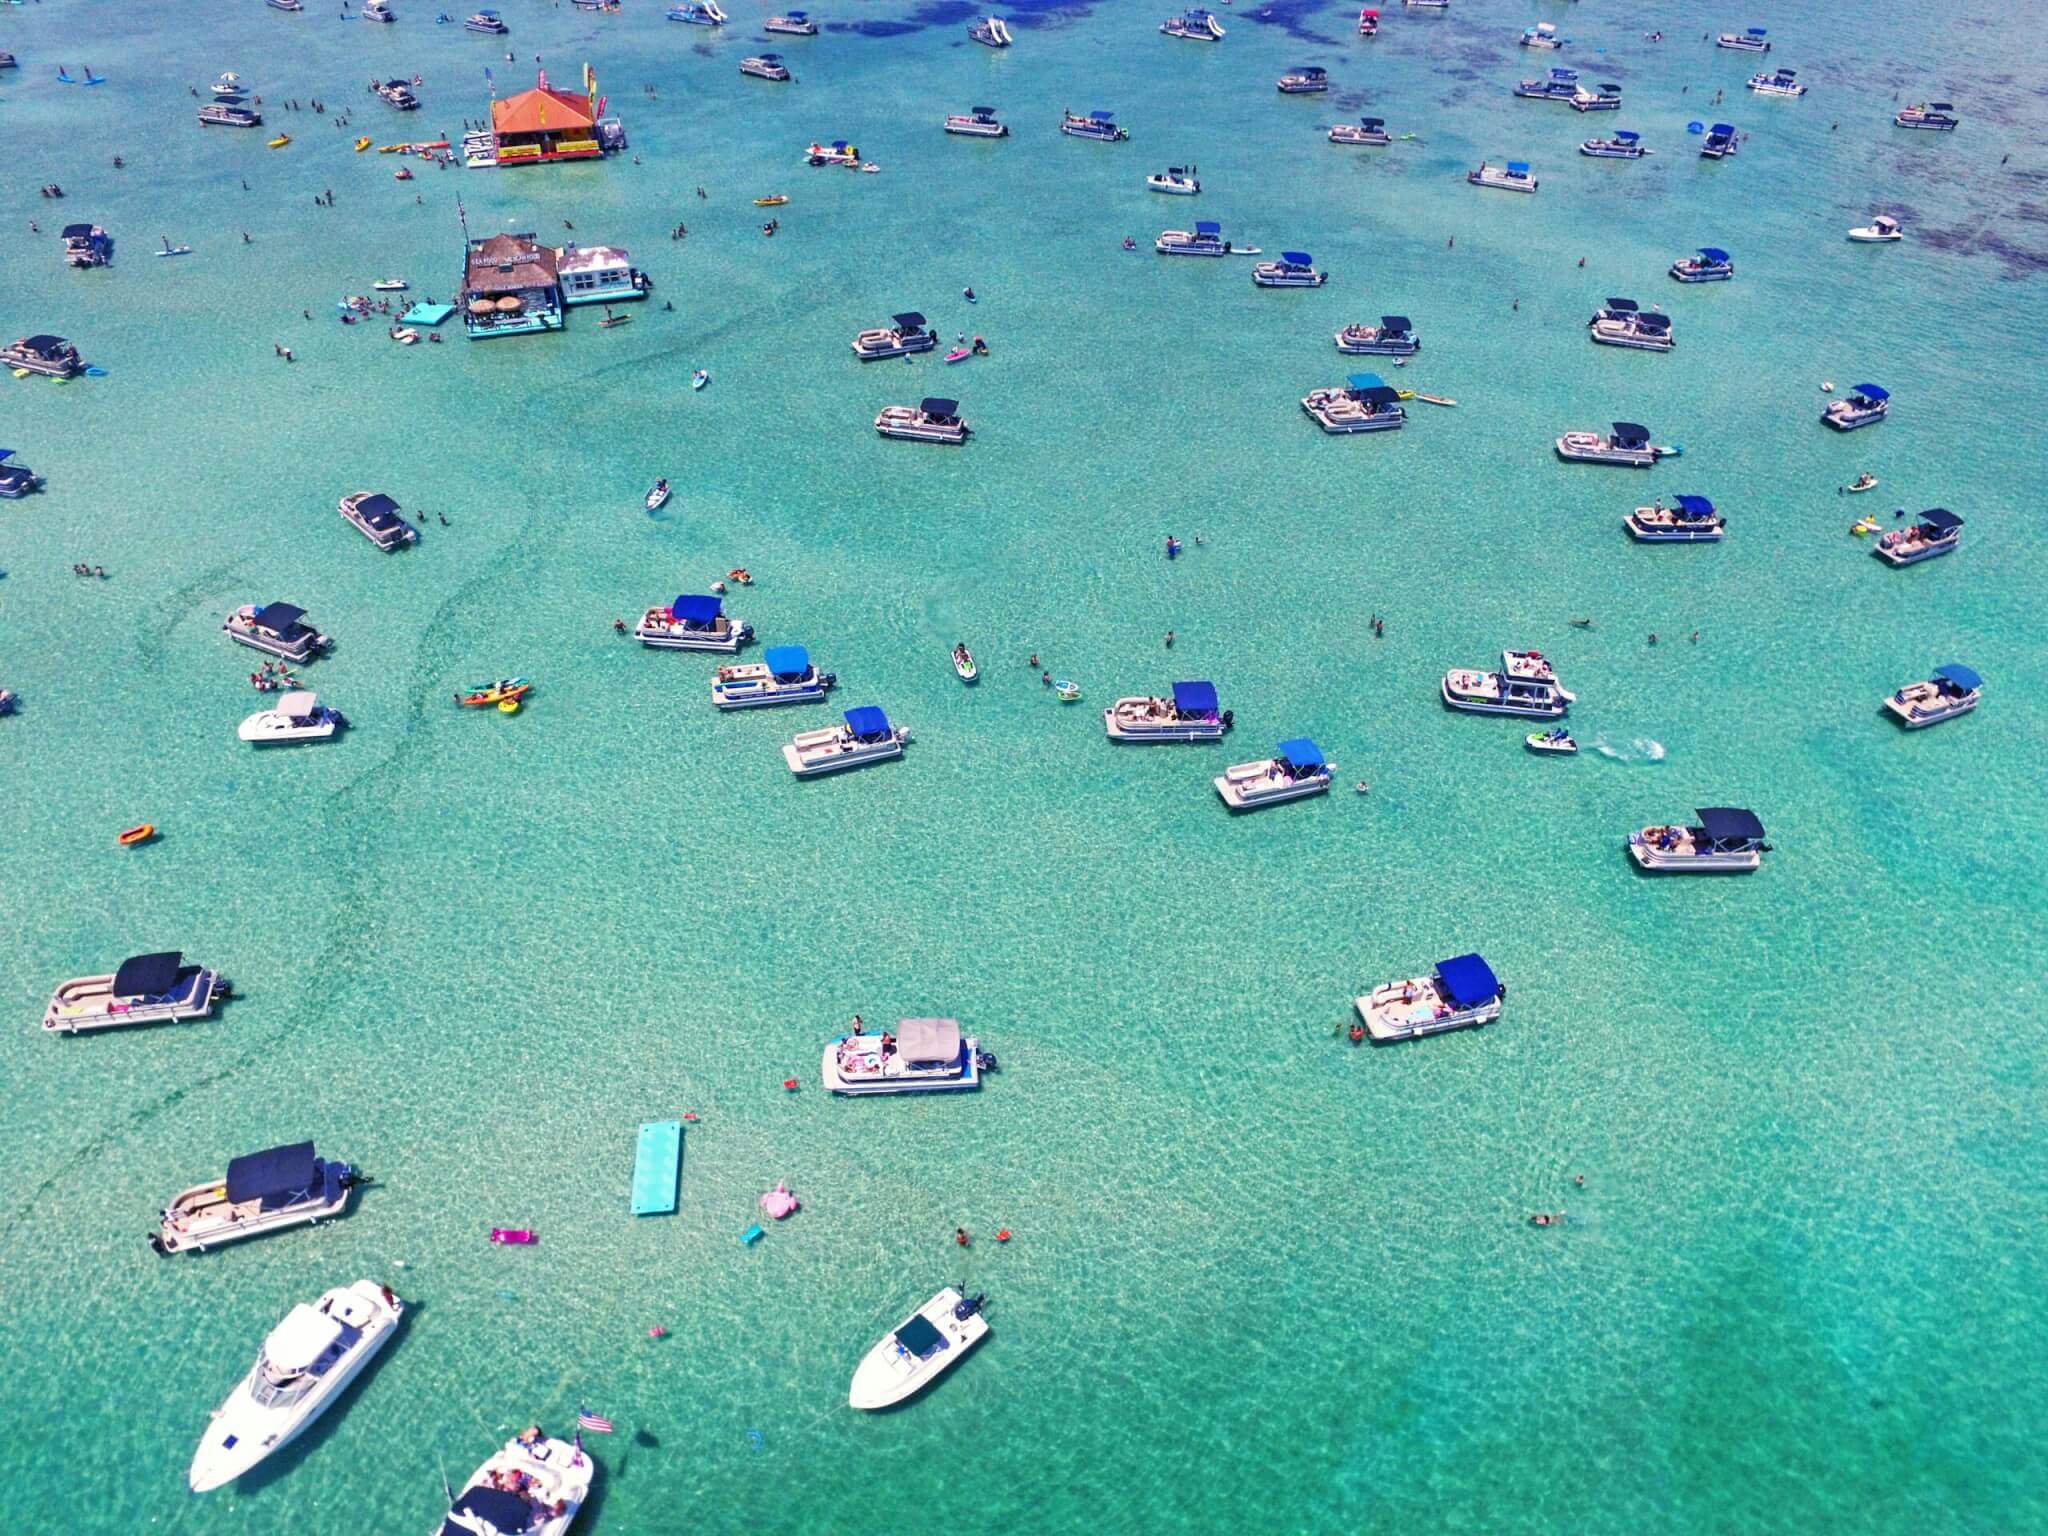 Crab Island, Fort Walton Beach, FL 32548. Crab Island is a sandbar that is located just South of the Marler Bridge in Destin, FL. Crab Island started to gain in popularity as boaters used the area to anchor their boats to catch some rays and wade on the sandbar.